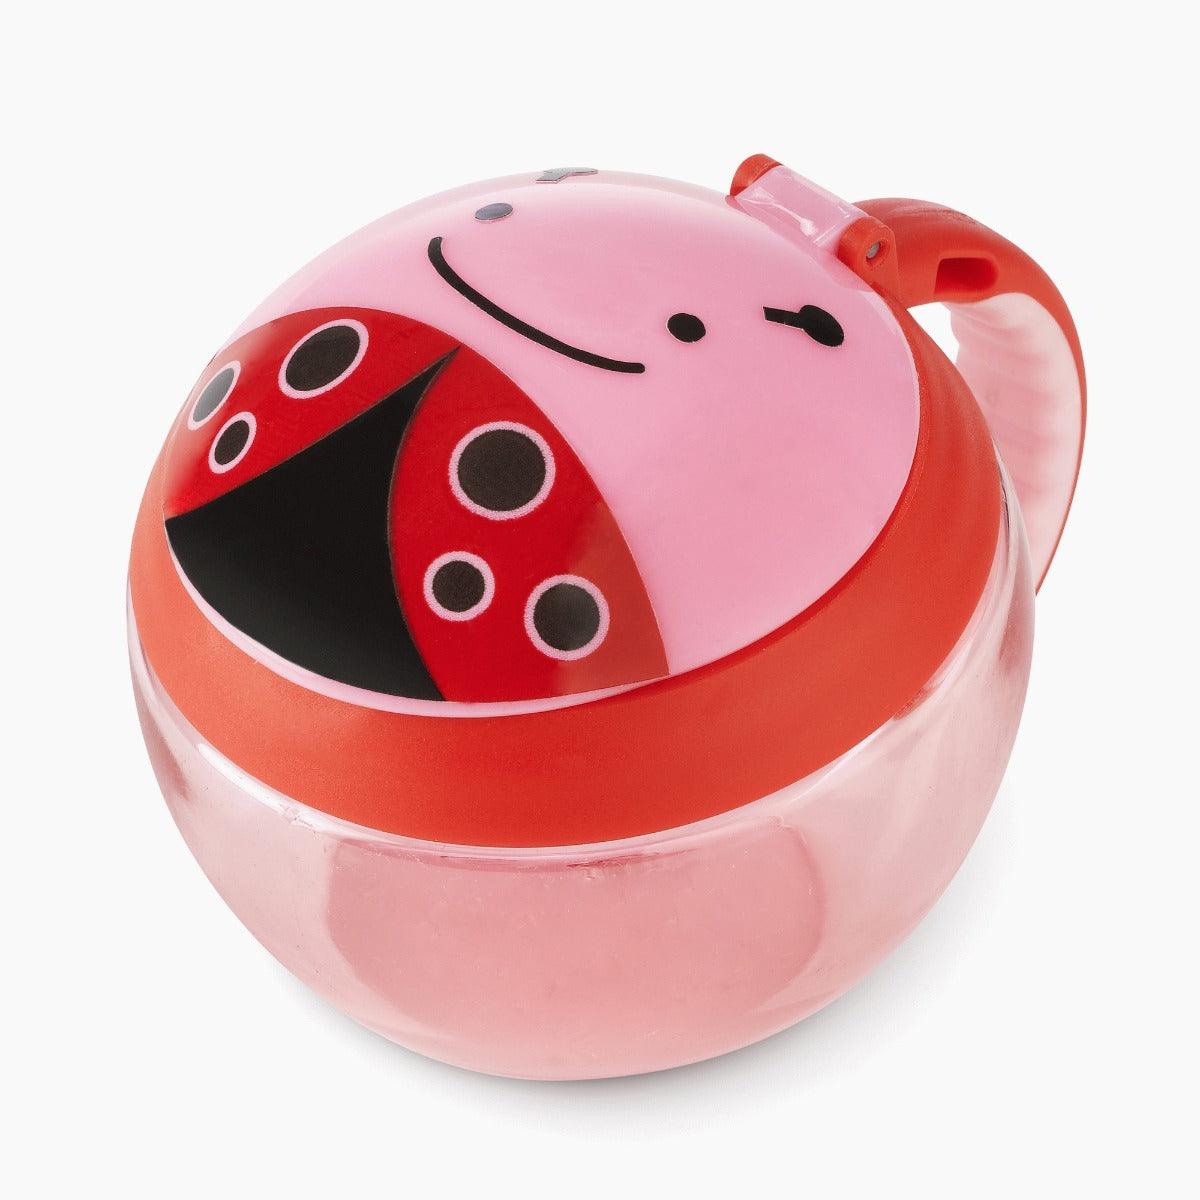 Skip Hop Zoo Snack Cup Ladybug - Weaning Accessory For Ages 1-4 Years